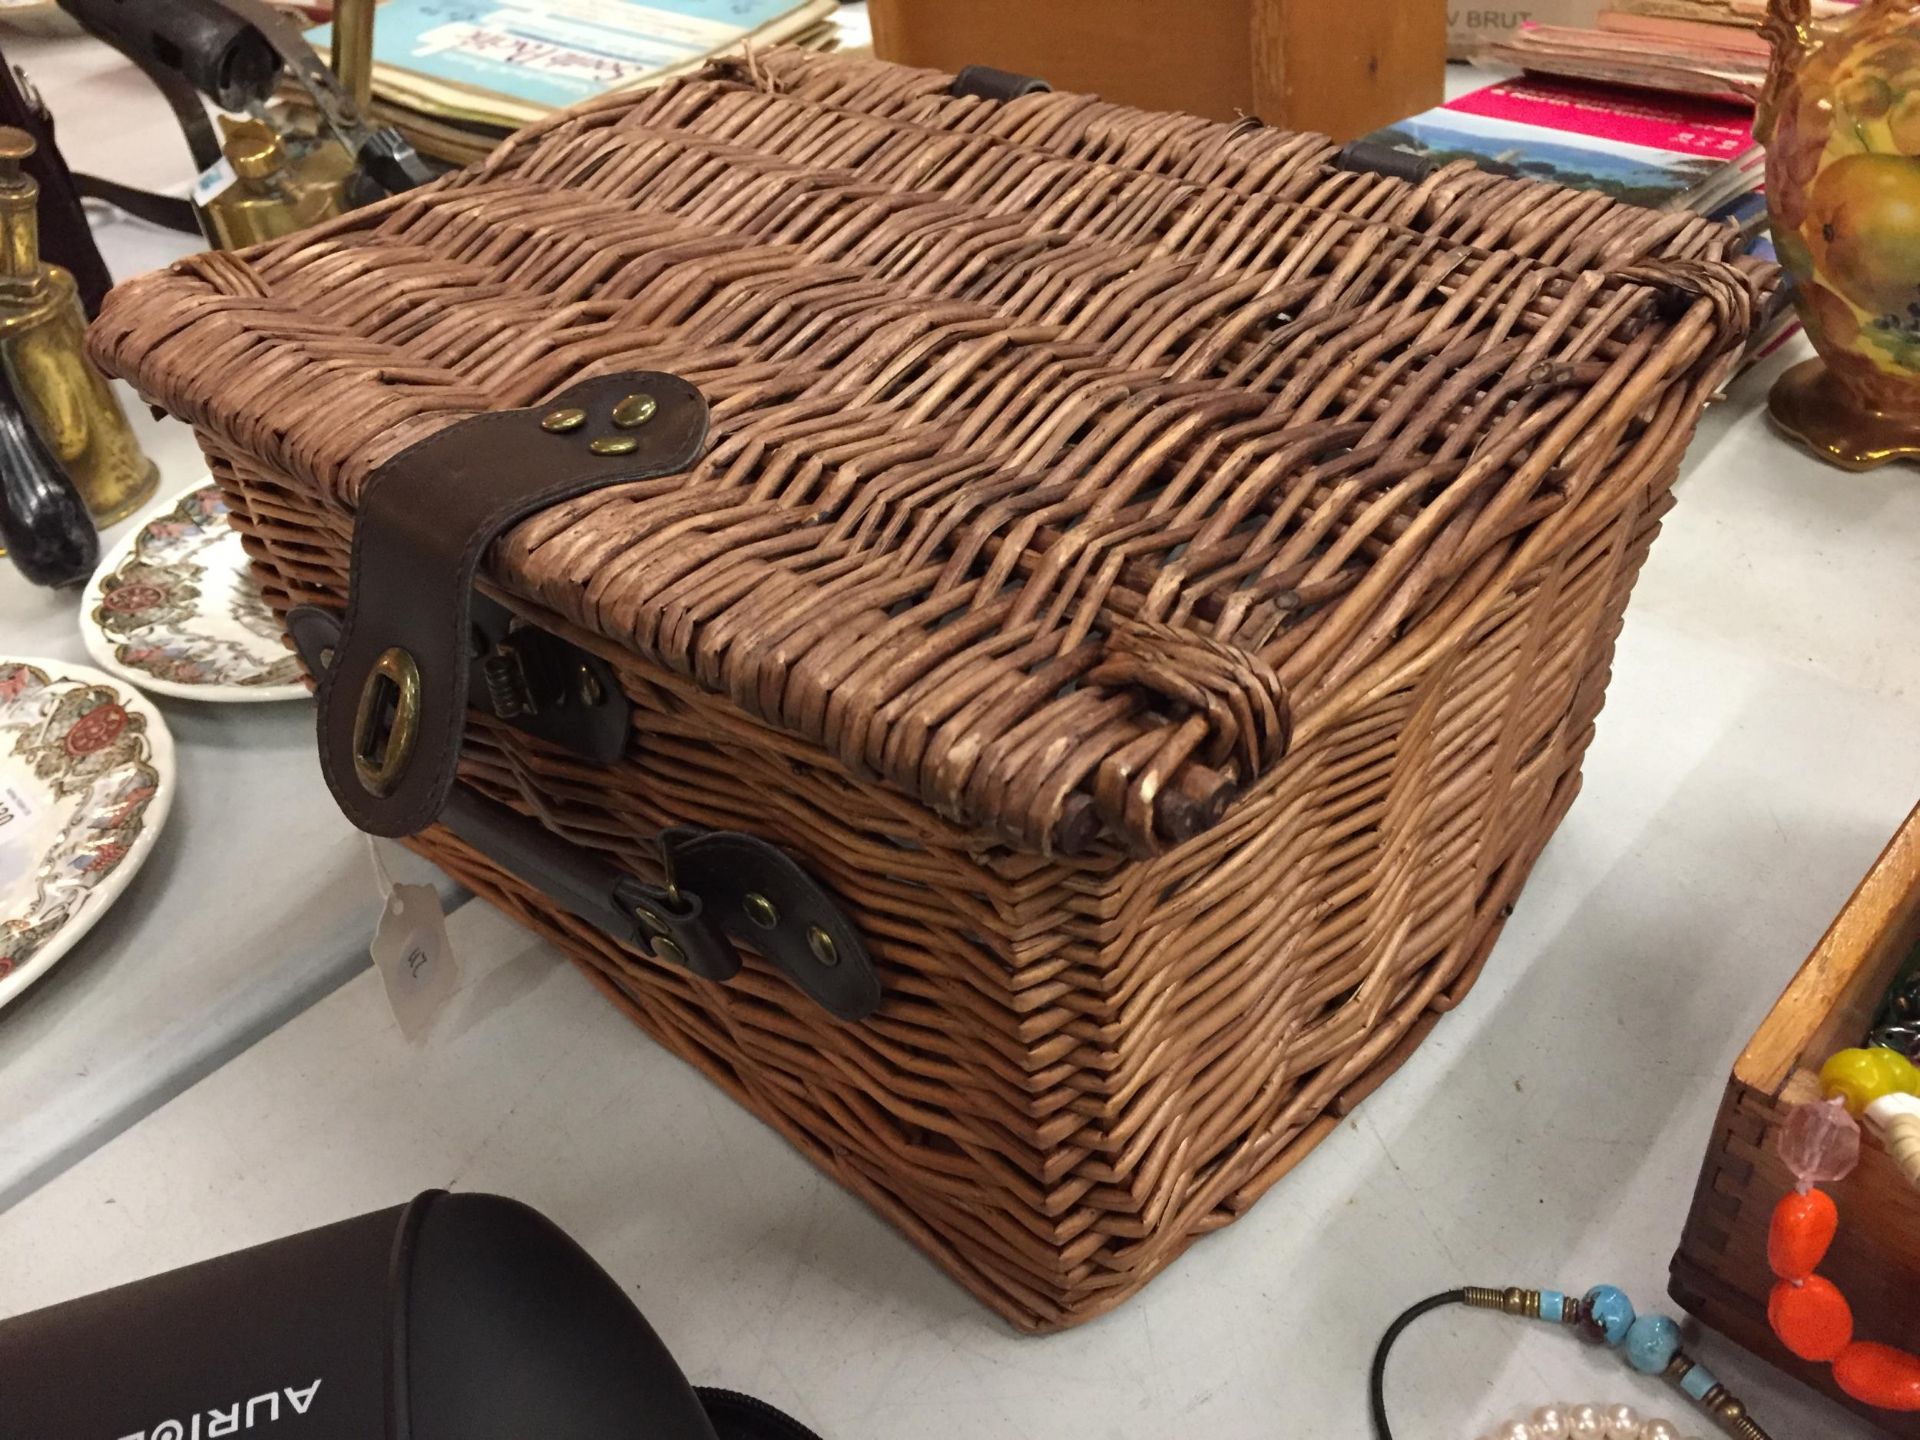 A WICKER PICNIC BASKET WITH PLATES, BOWLS AND CUPS - Image 2 of 3